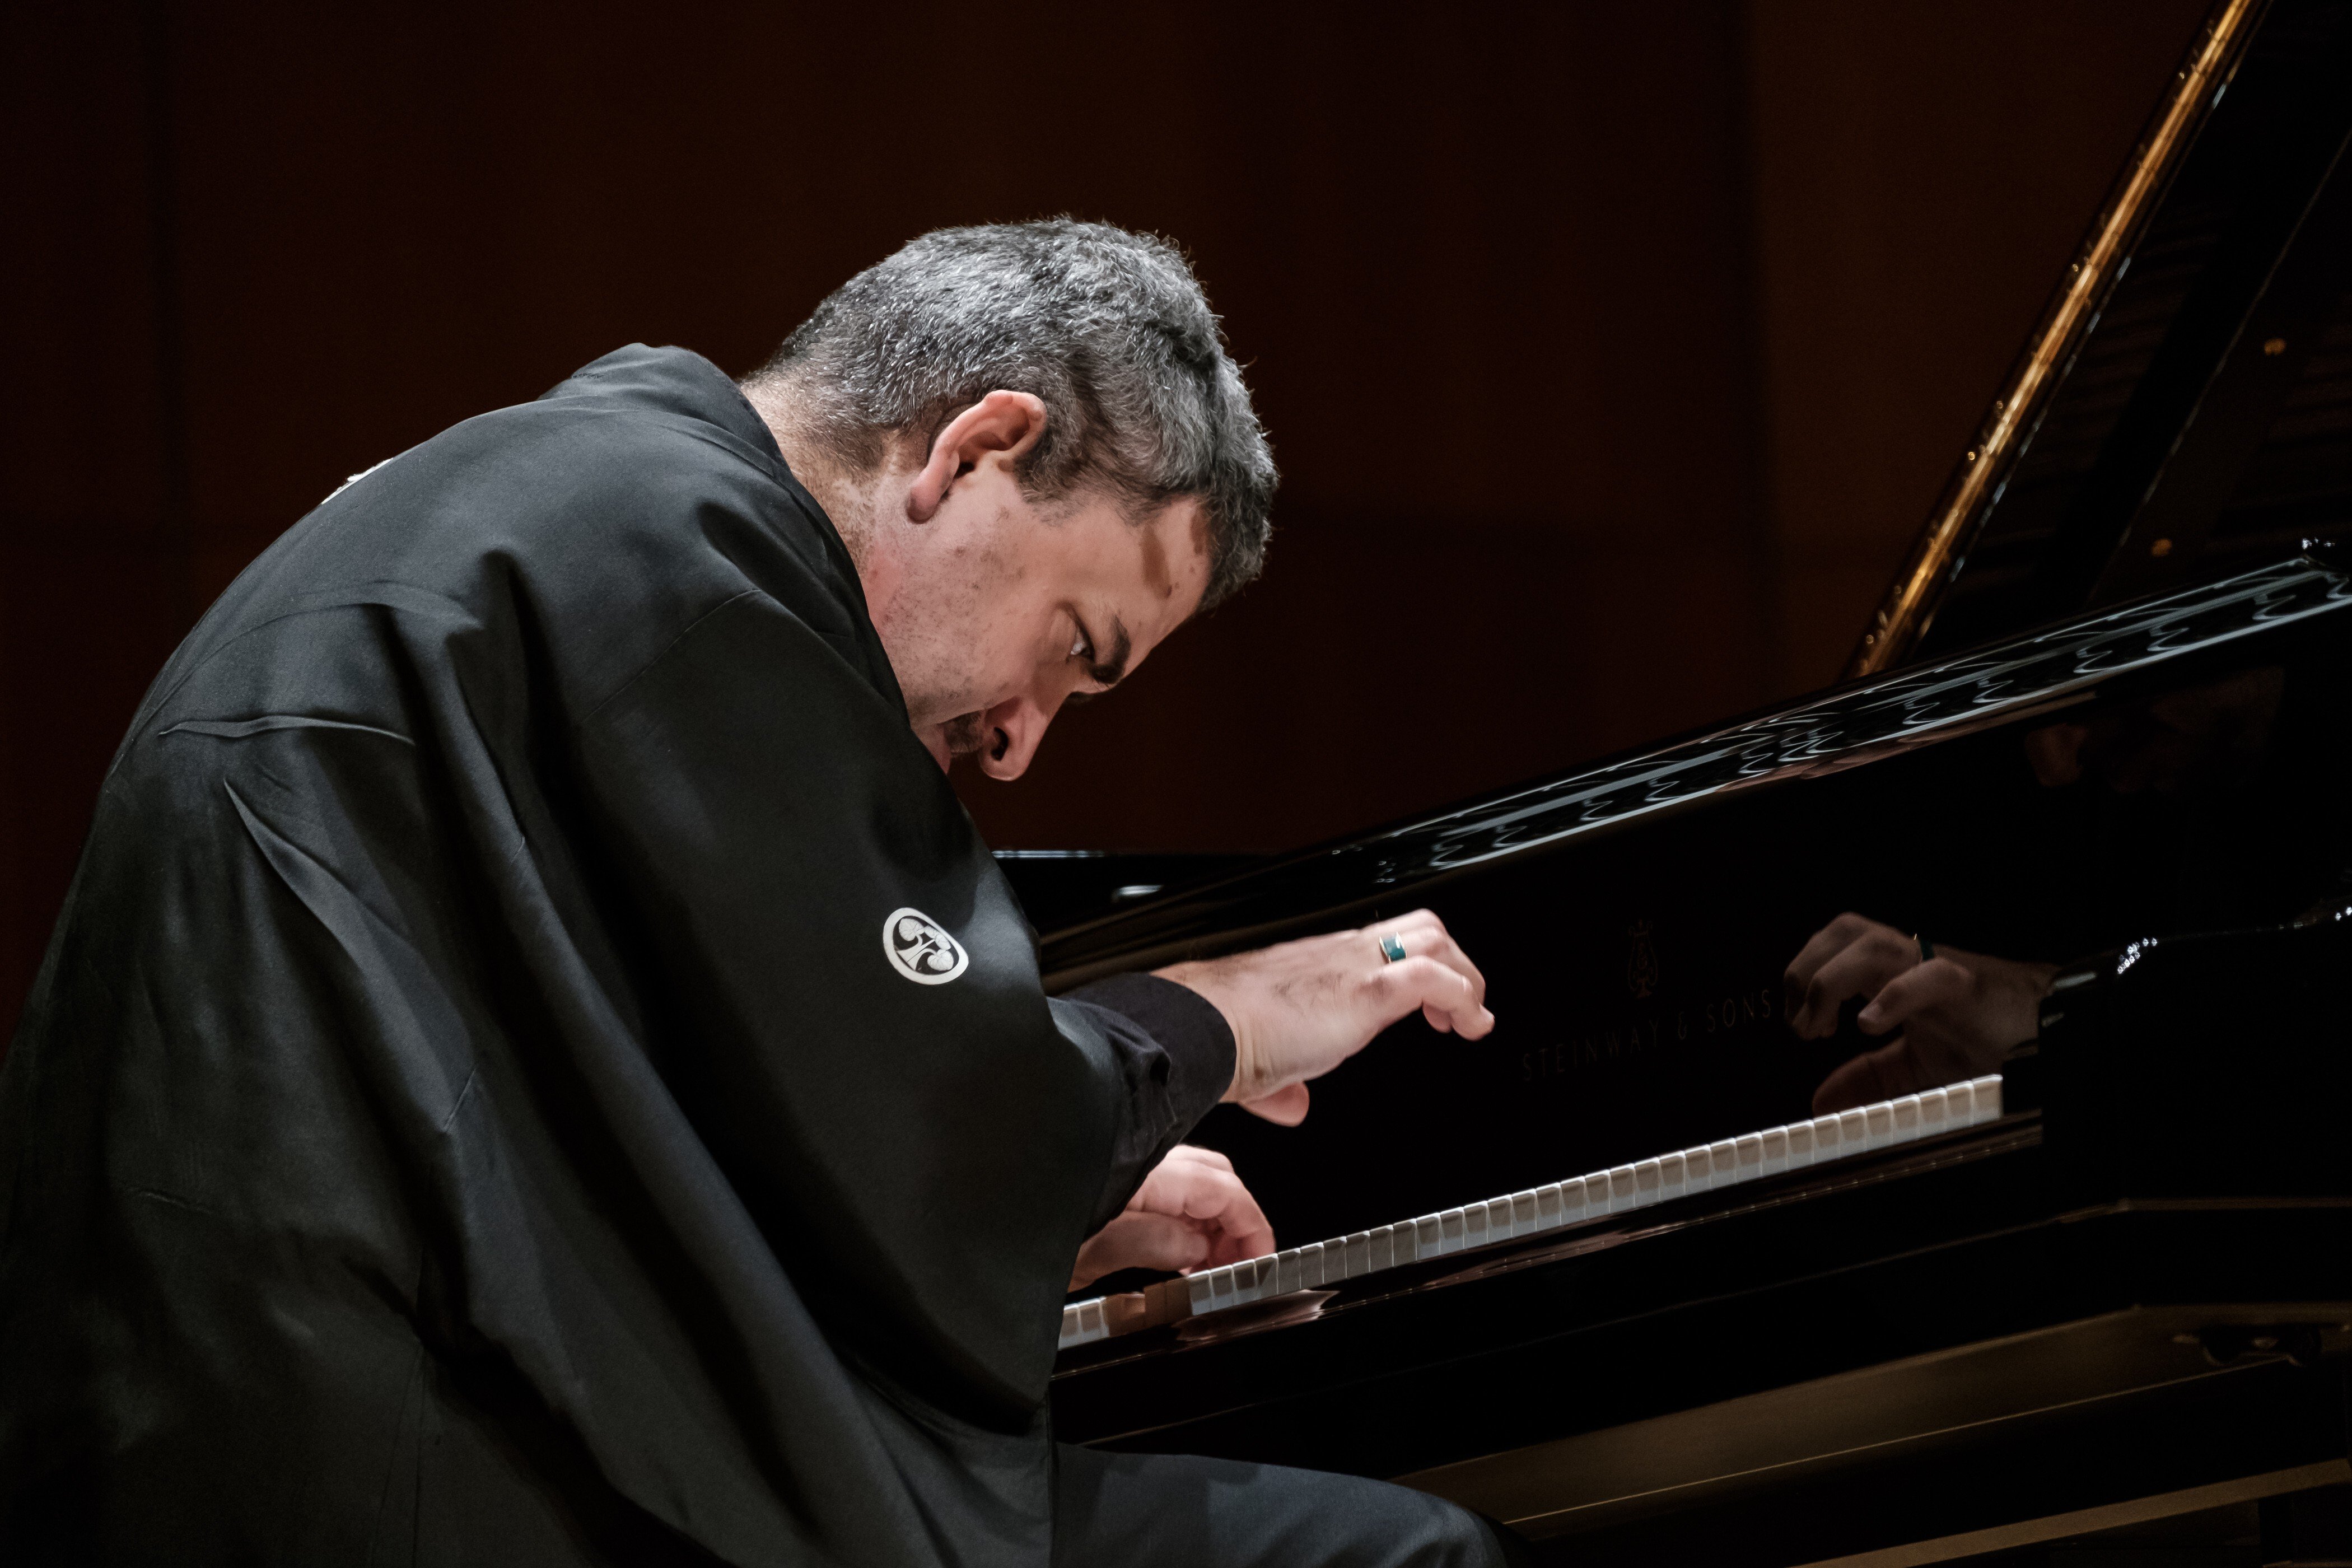 Pianist Konstantin Lifschitz played all 32 Beethoven piano sonatas in eight concerts at the University of Hong Kong in 2017. Recordings of the concerts have been issued on compact disc and in a limited-edition vinyl set. Photo: HKU Muse